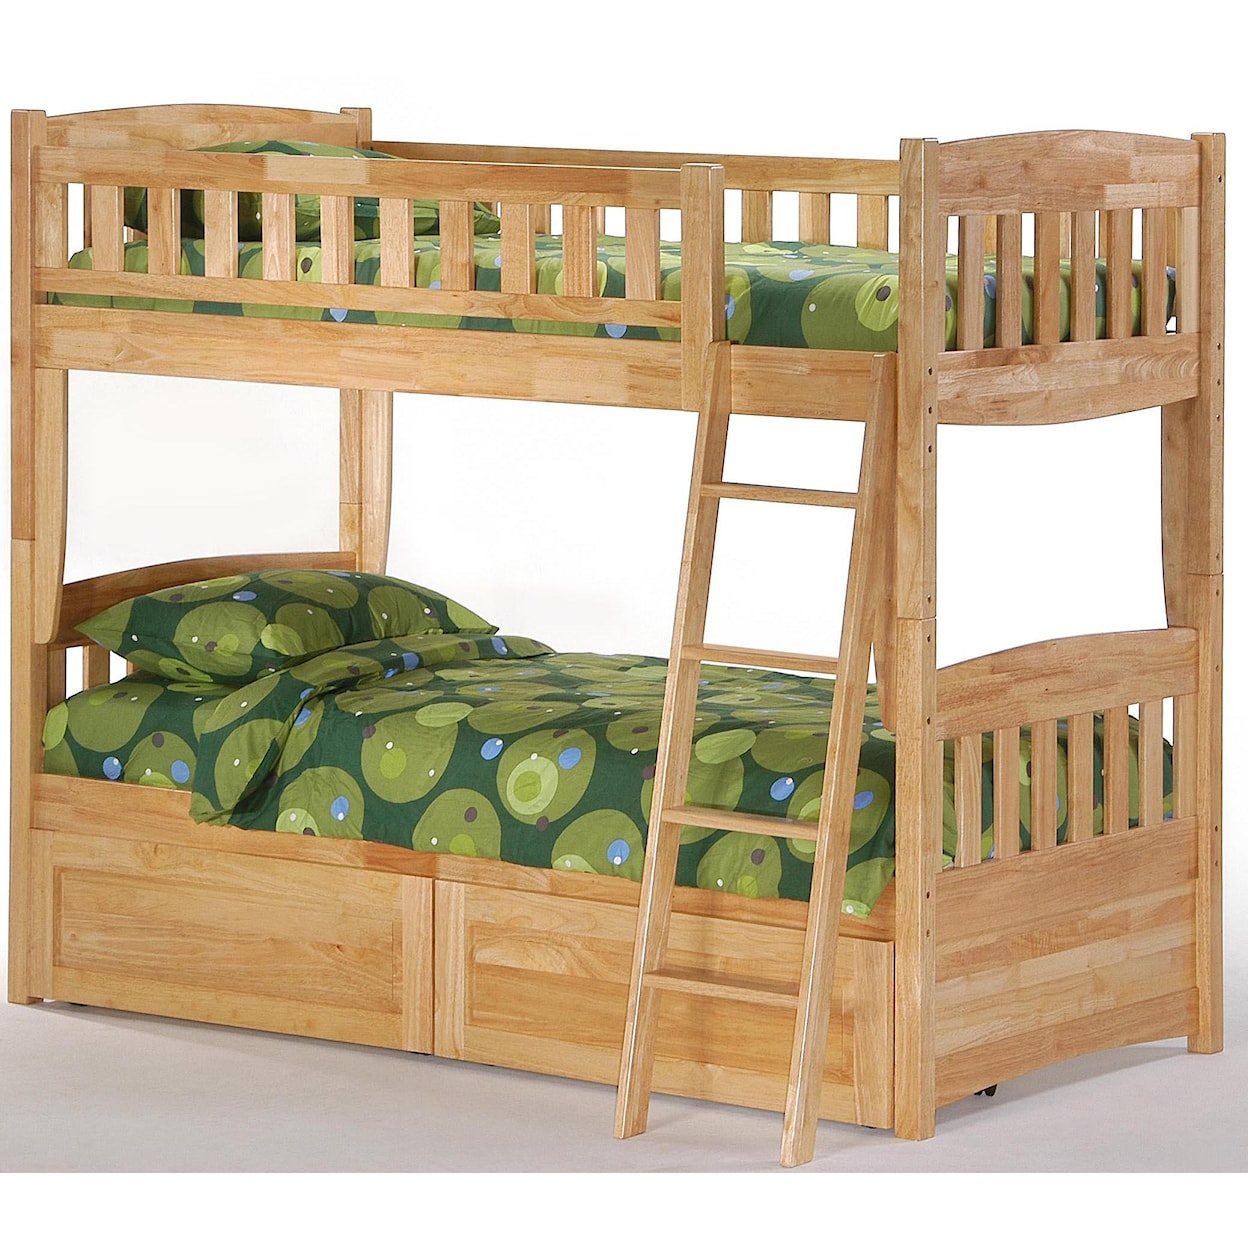 Night & Day Furniture Spice Twin Bunk Bed with Storage Drawers